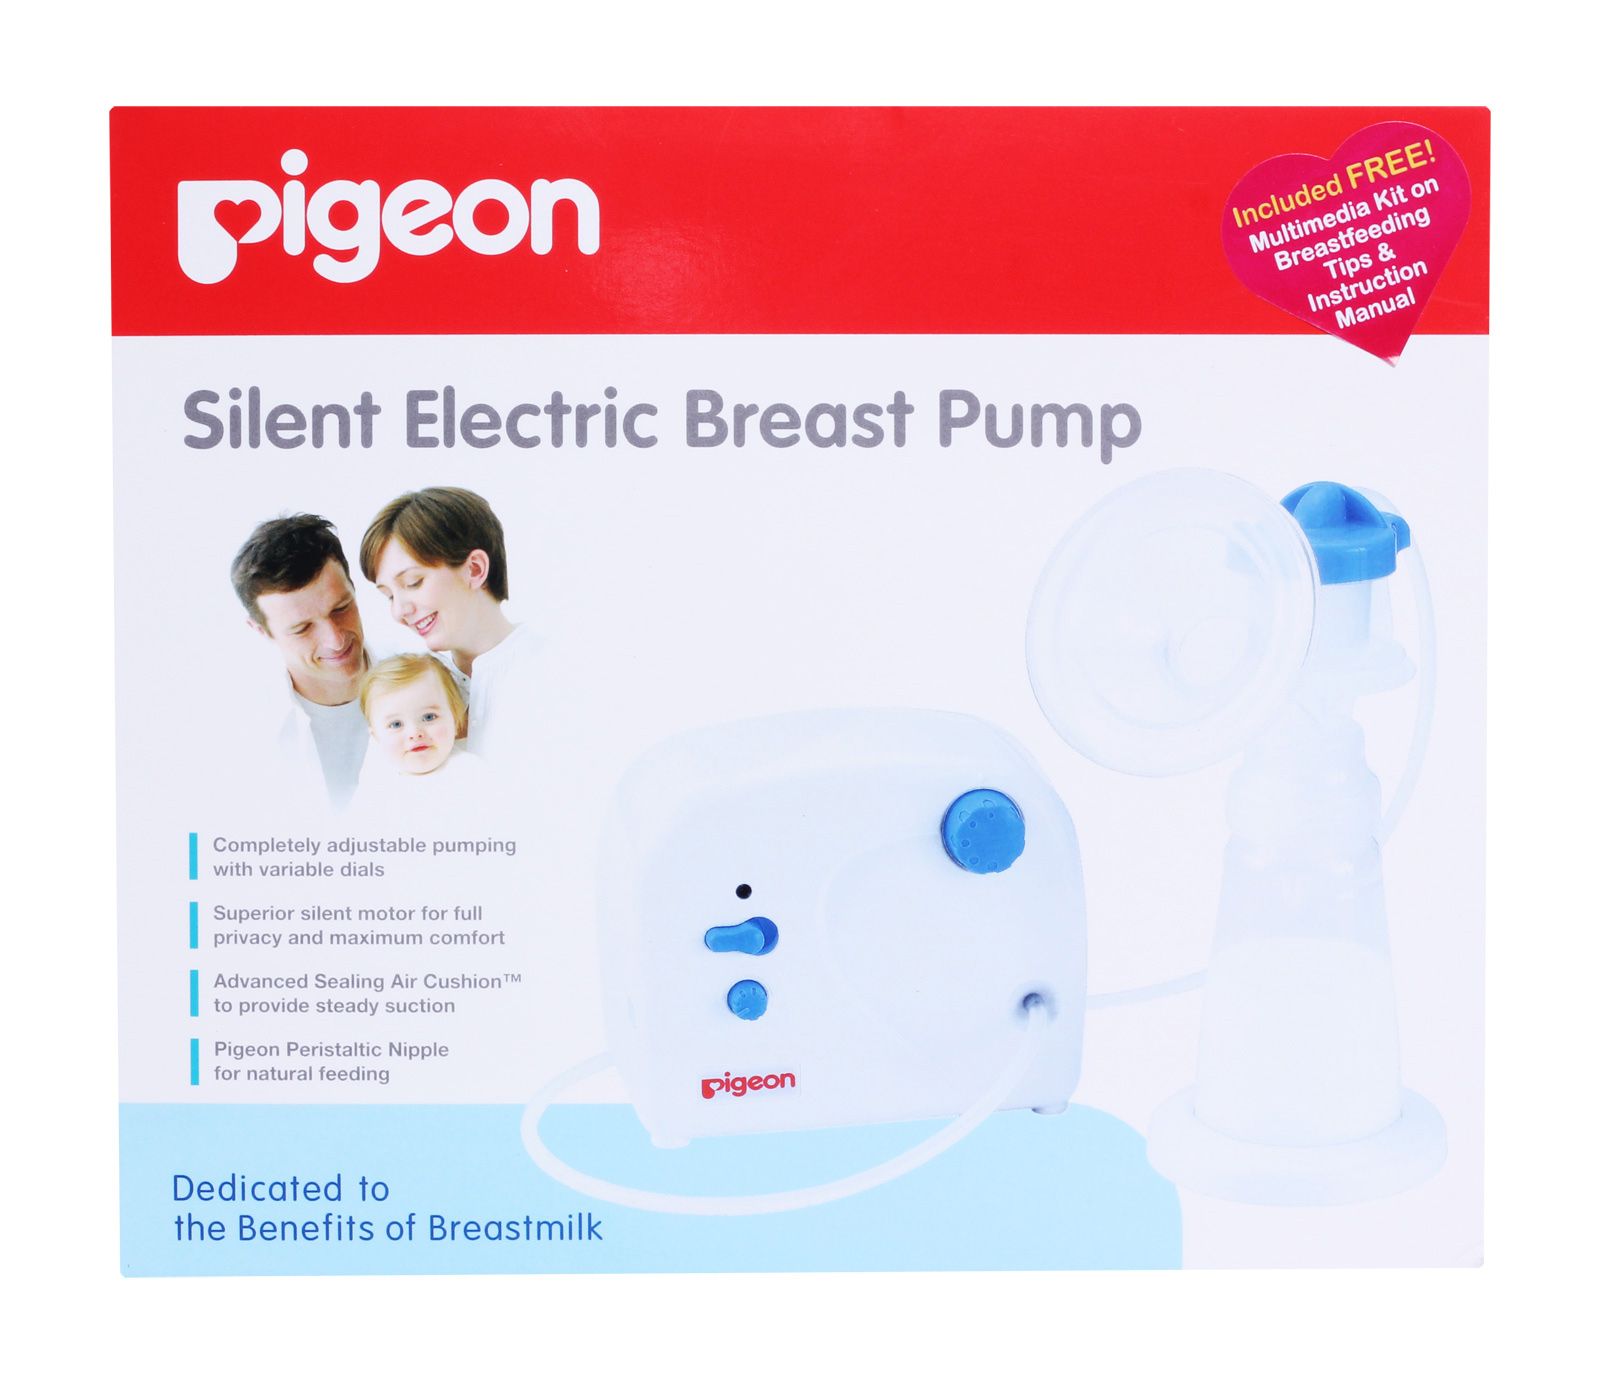 Pigeon Silent Electrical Breast Pump